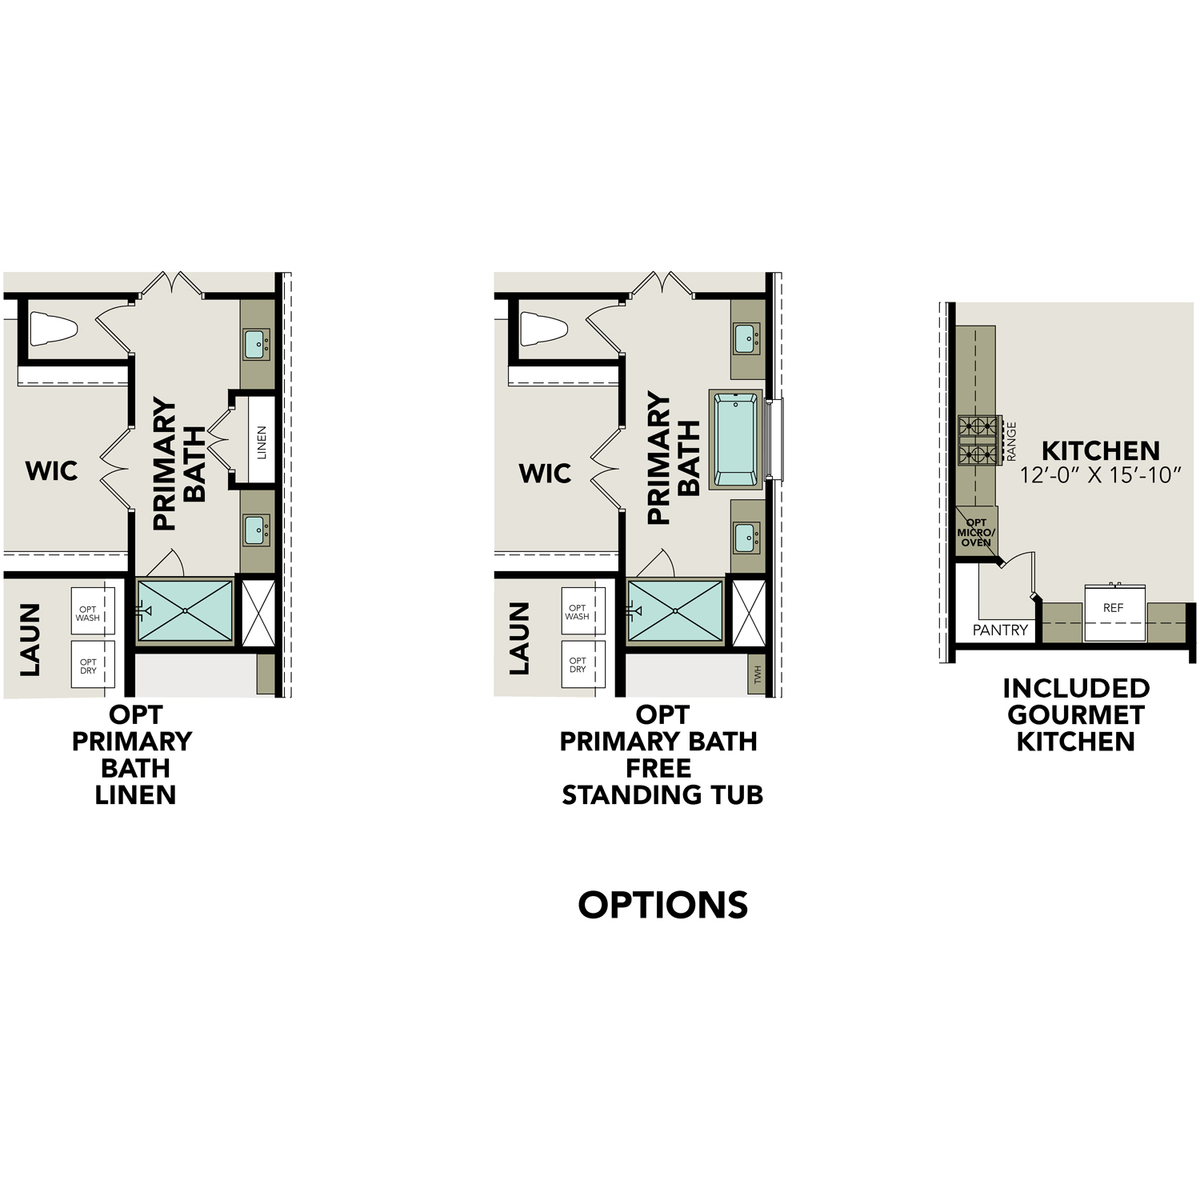 3 - The Jennings G floor plan layout for 248 Jereth Crossing in Davidson Homes' The Reserve at Potranco Oaks community.